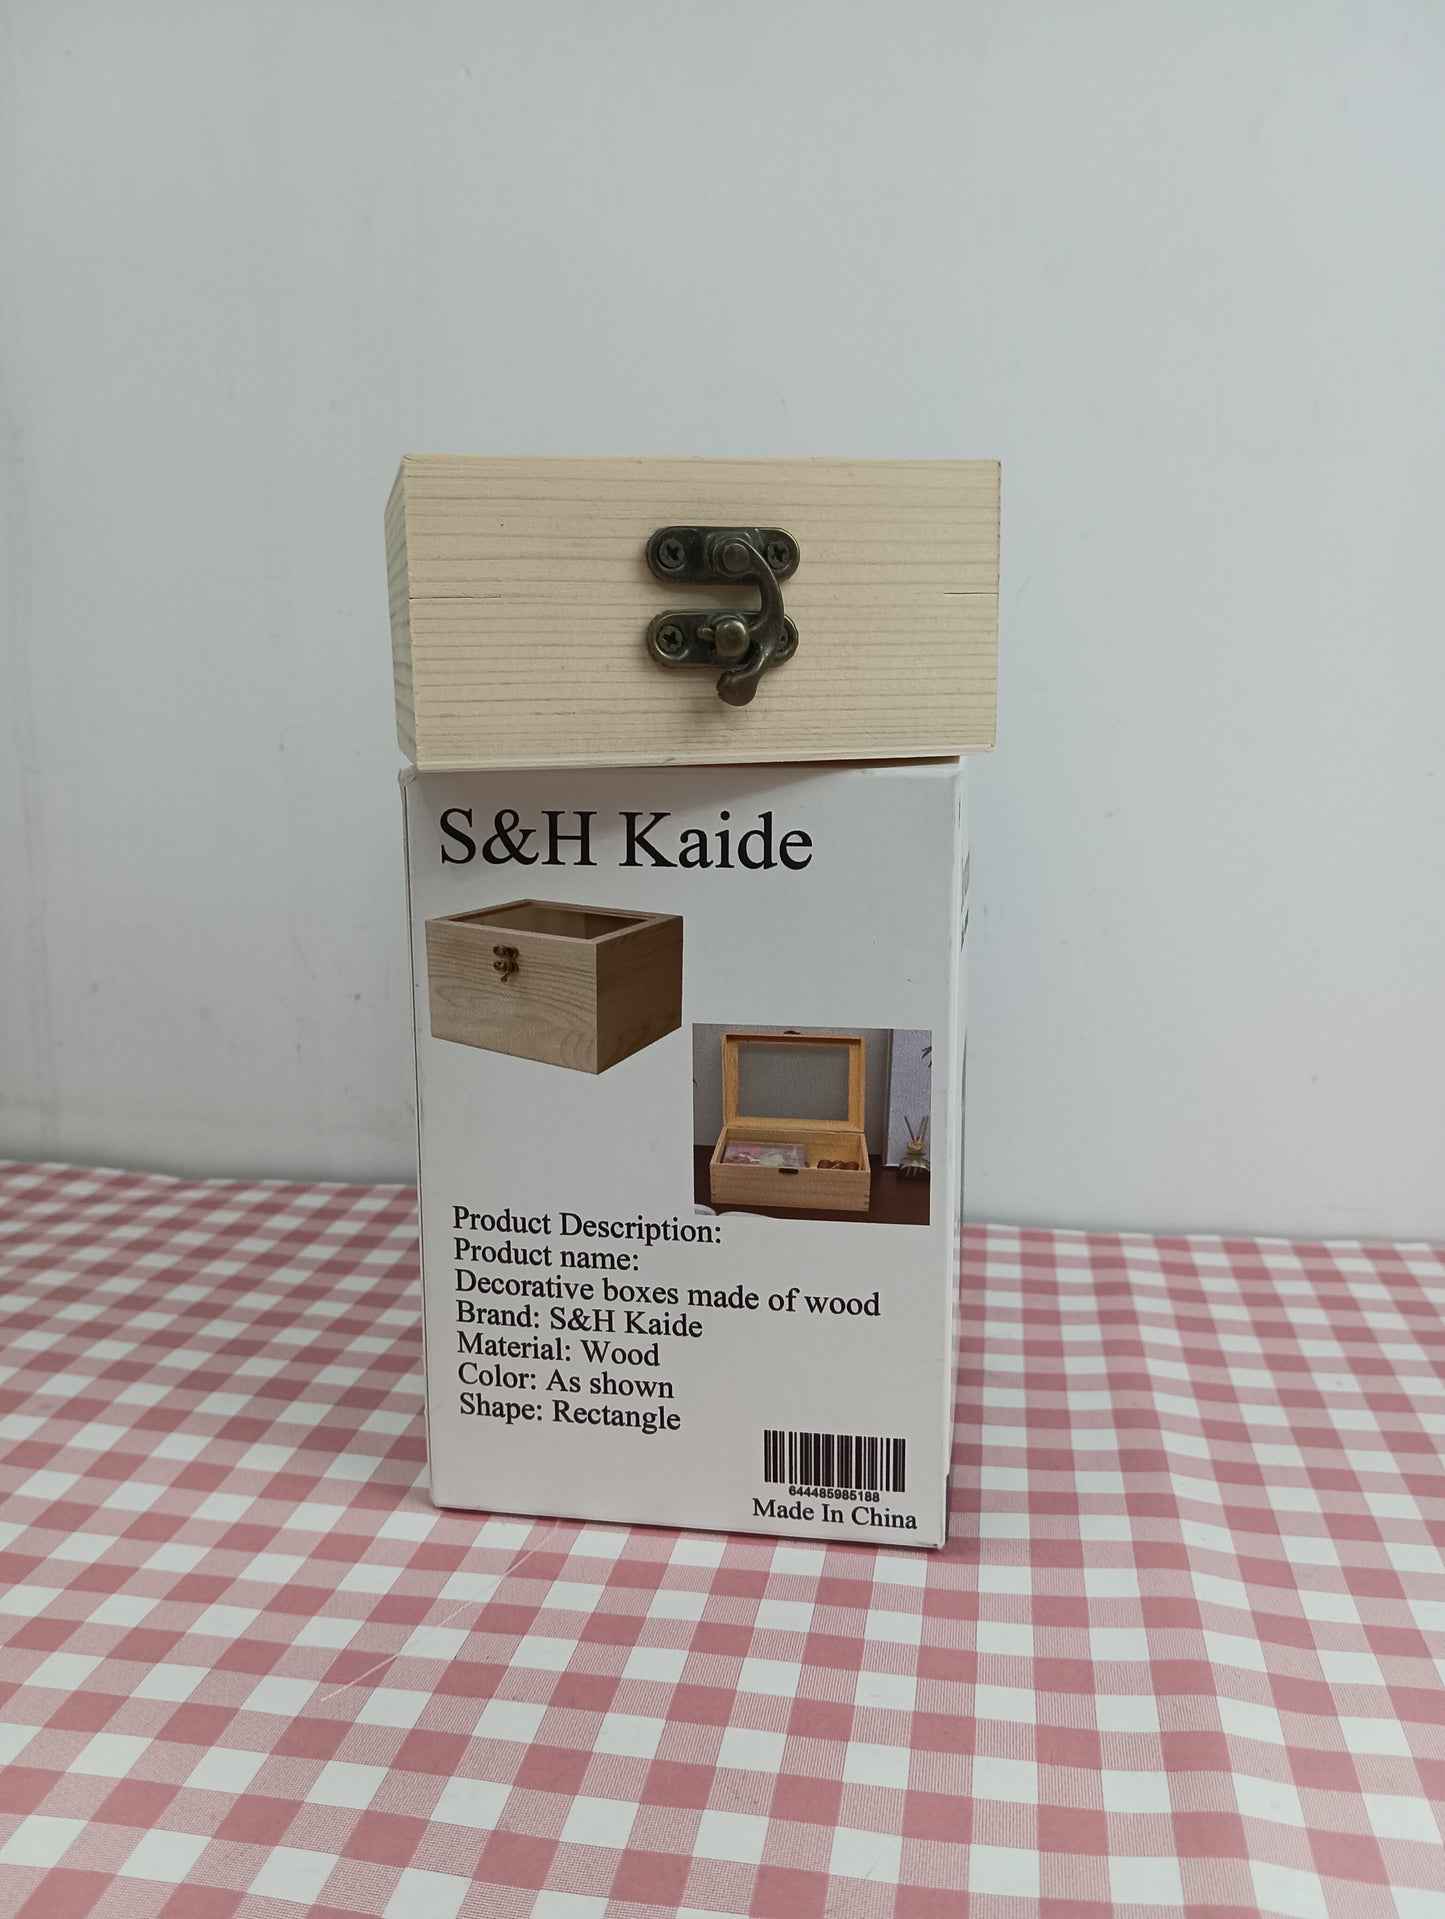 S&H Kaide Decorative boxes made of wood Transparent Glass Lid Small Wooden Box Super Small Mini Box with Lid Show Box Transparent Glass Lid Wooden Box Desktop Solid Wooden Box Accompanying Gift Packaging Box Jewelry Sundry Storage Boxes